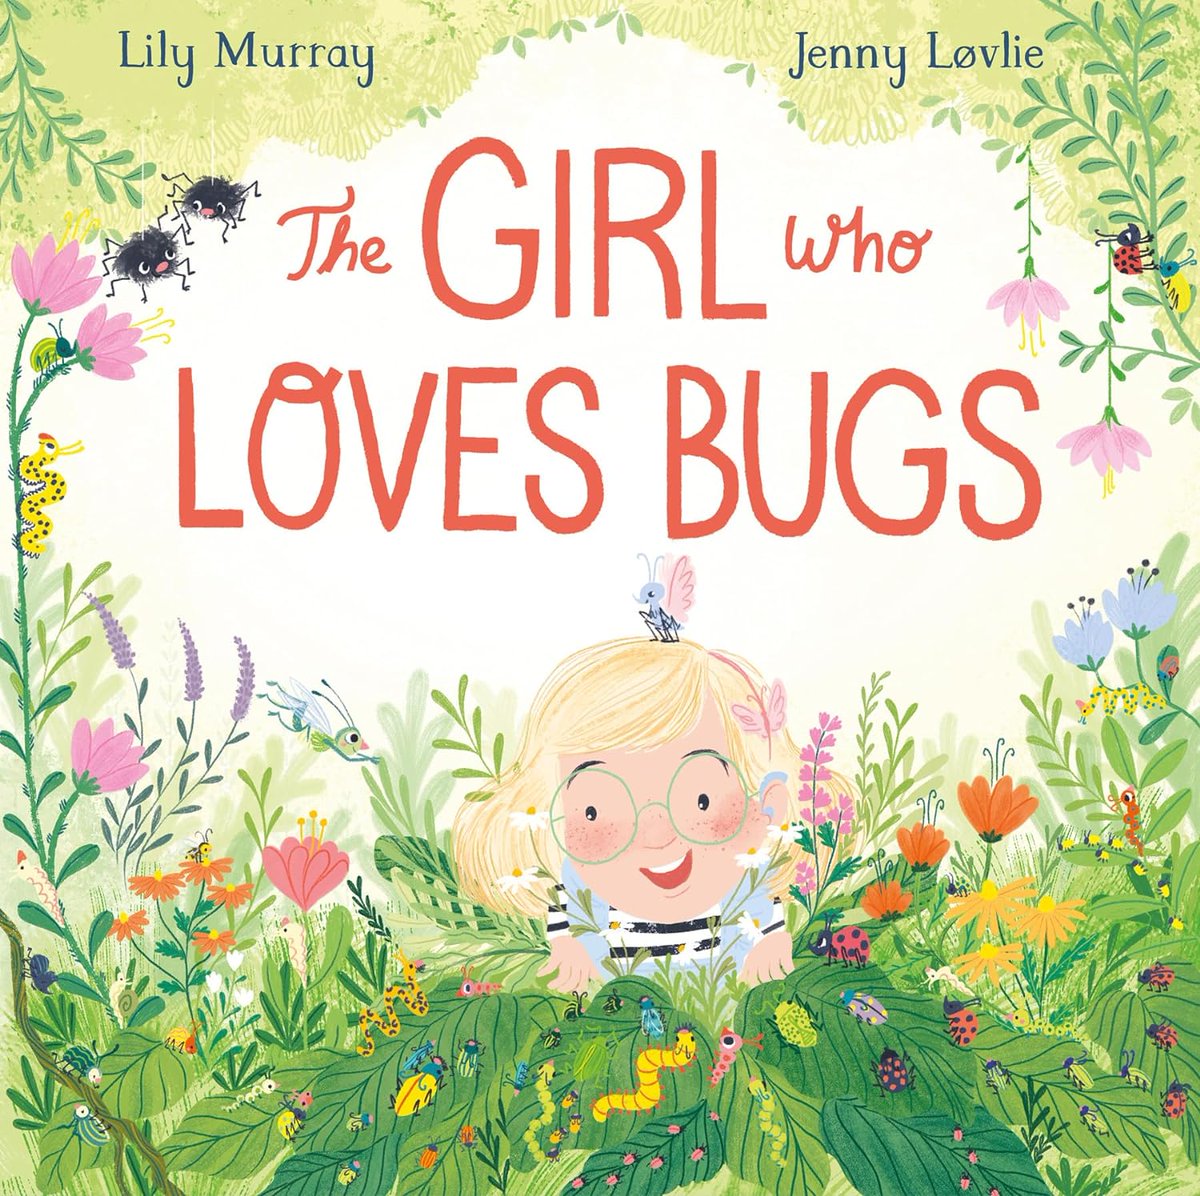 You can #enter2win a #childrensbook #giveaway Mar 22 to April 11 - USA THE GIRL WHO LOVES BUGS Delightful story. Fun. Cheerful art. chatwithvera.com/2024/01/the-vo… #sponsored @PeachtreePub @GG_Survey #picturebook